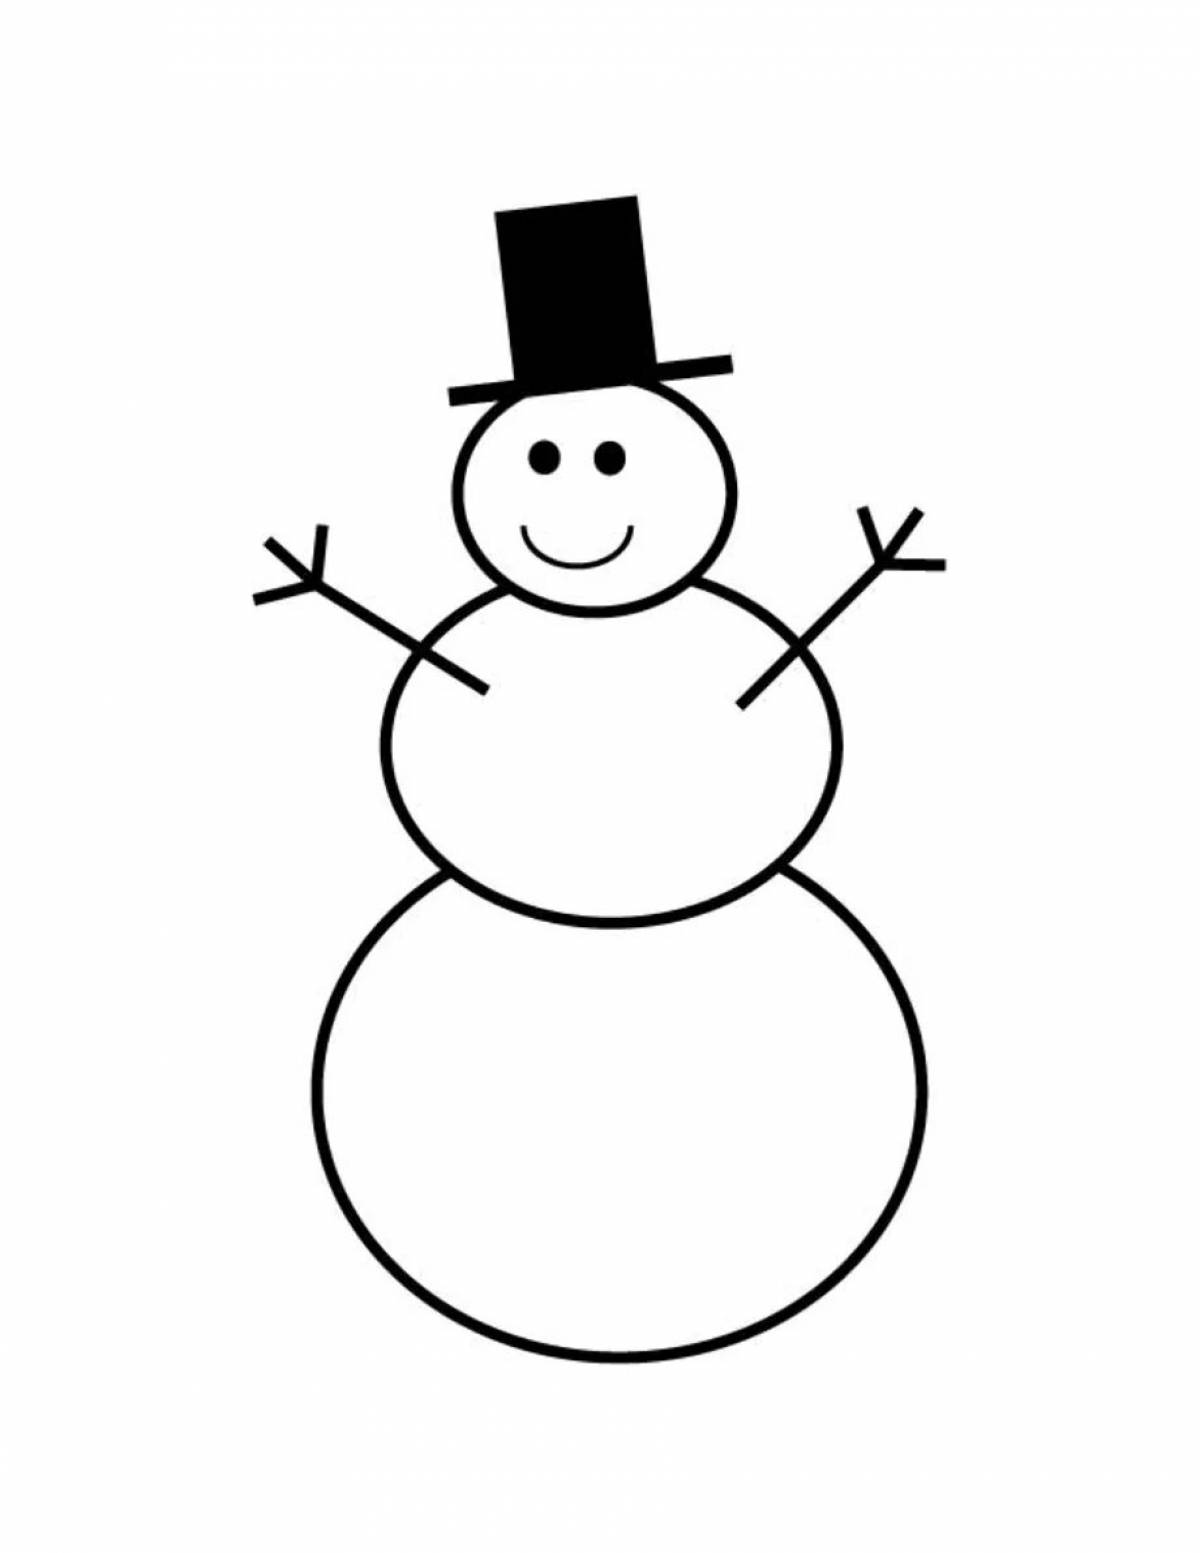 Snowman without nose #10